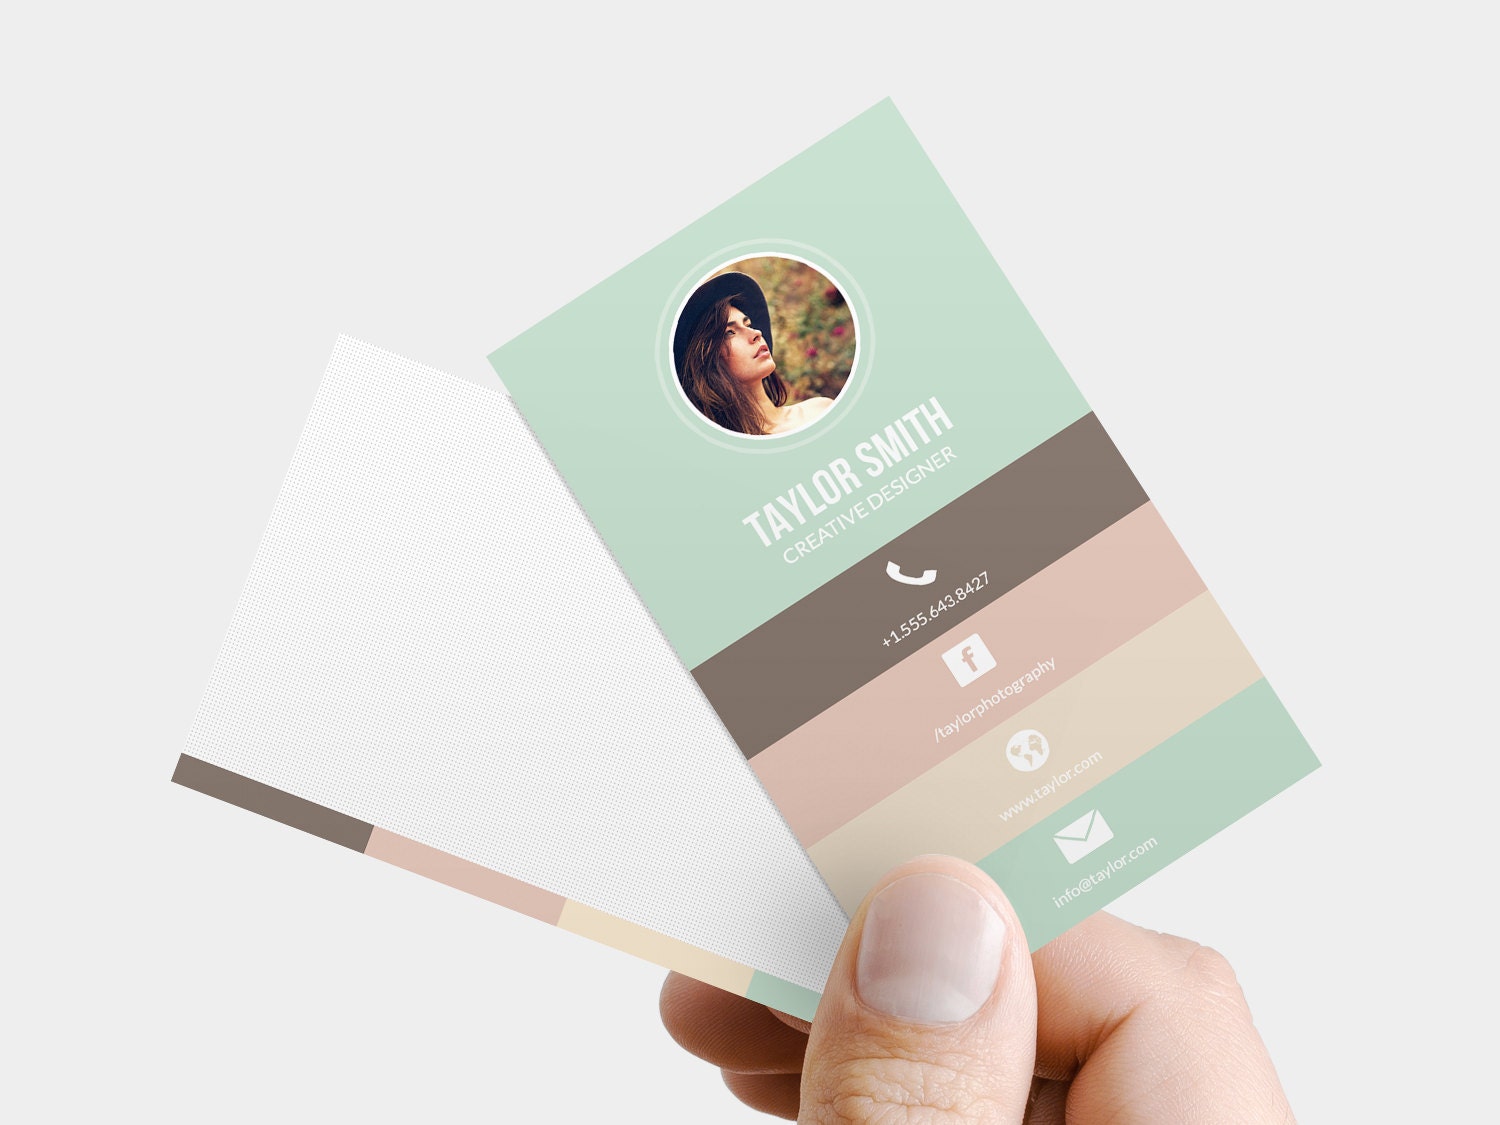 free business card templates print at home